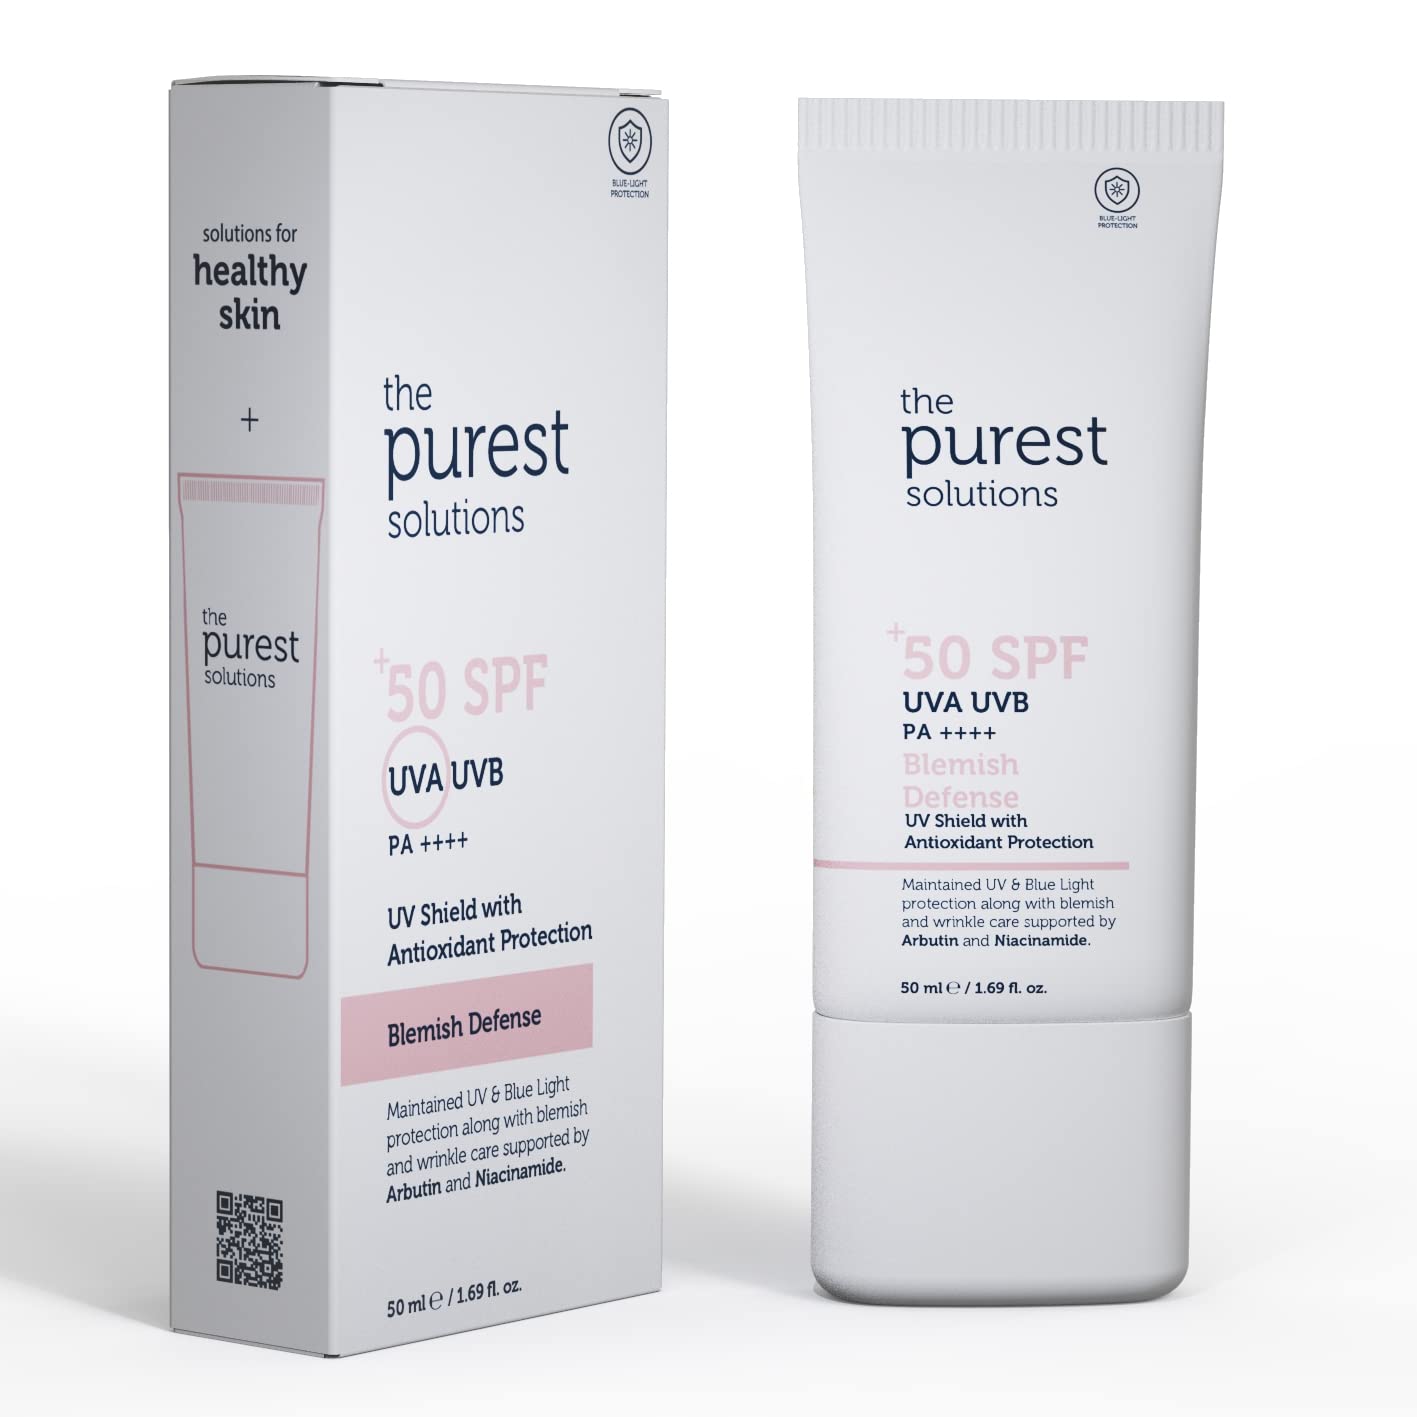 The Purest Solutions Blemish Defense UV Shield with Antioxidant Protection SPF 50 8h UVA Protection Arbutin Niacina